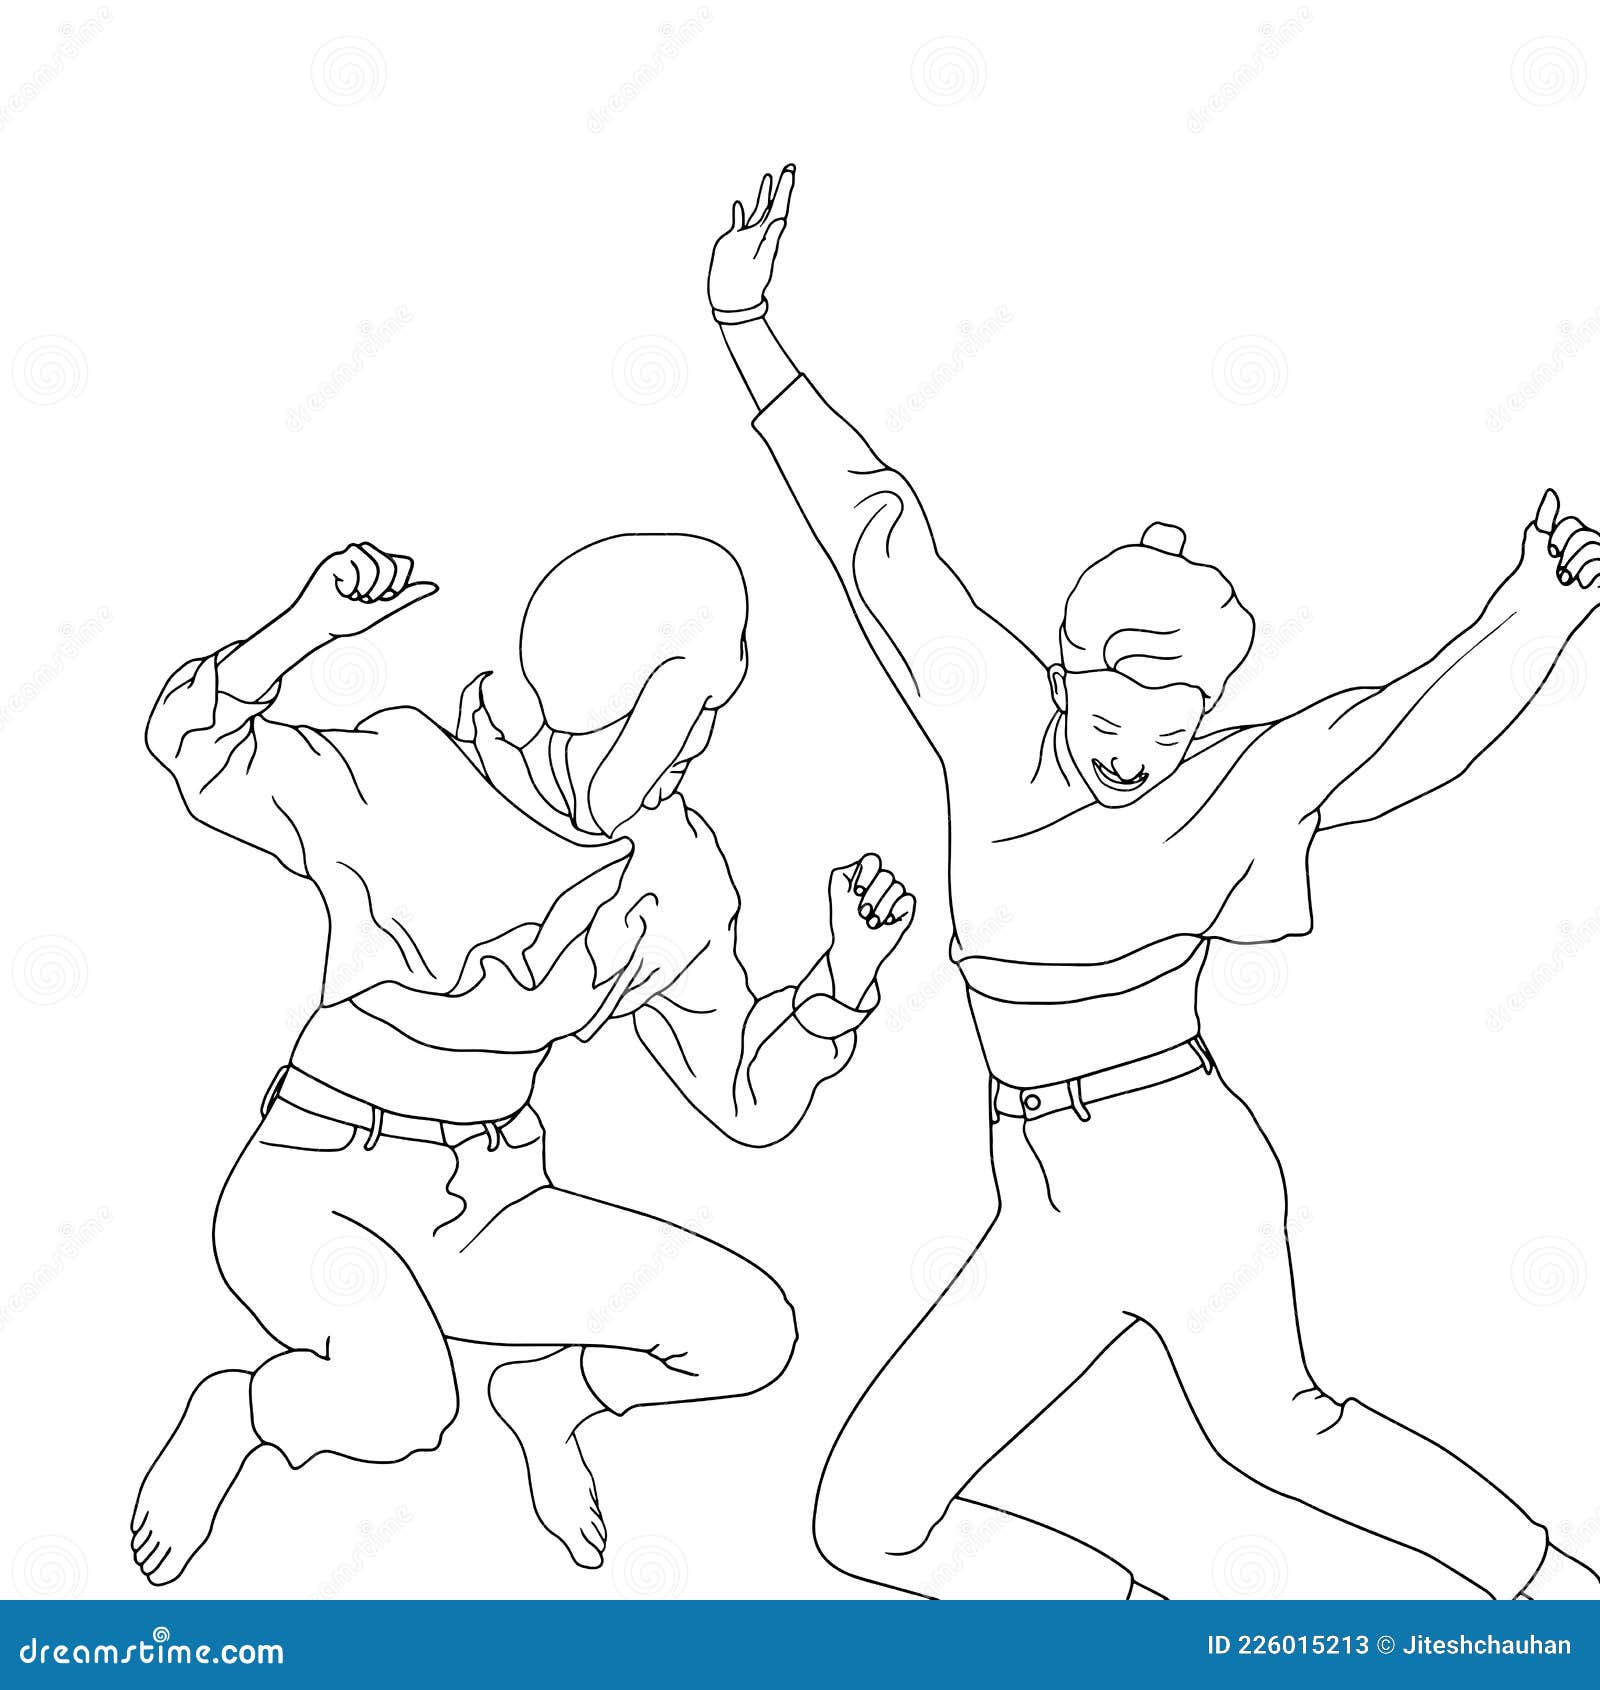 Coloring Pages - Two Girls Jumping in the Air Hand-drawn Character ...